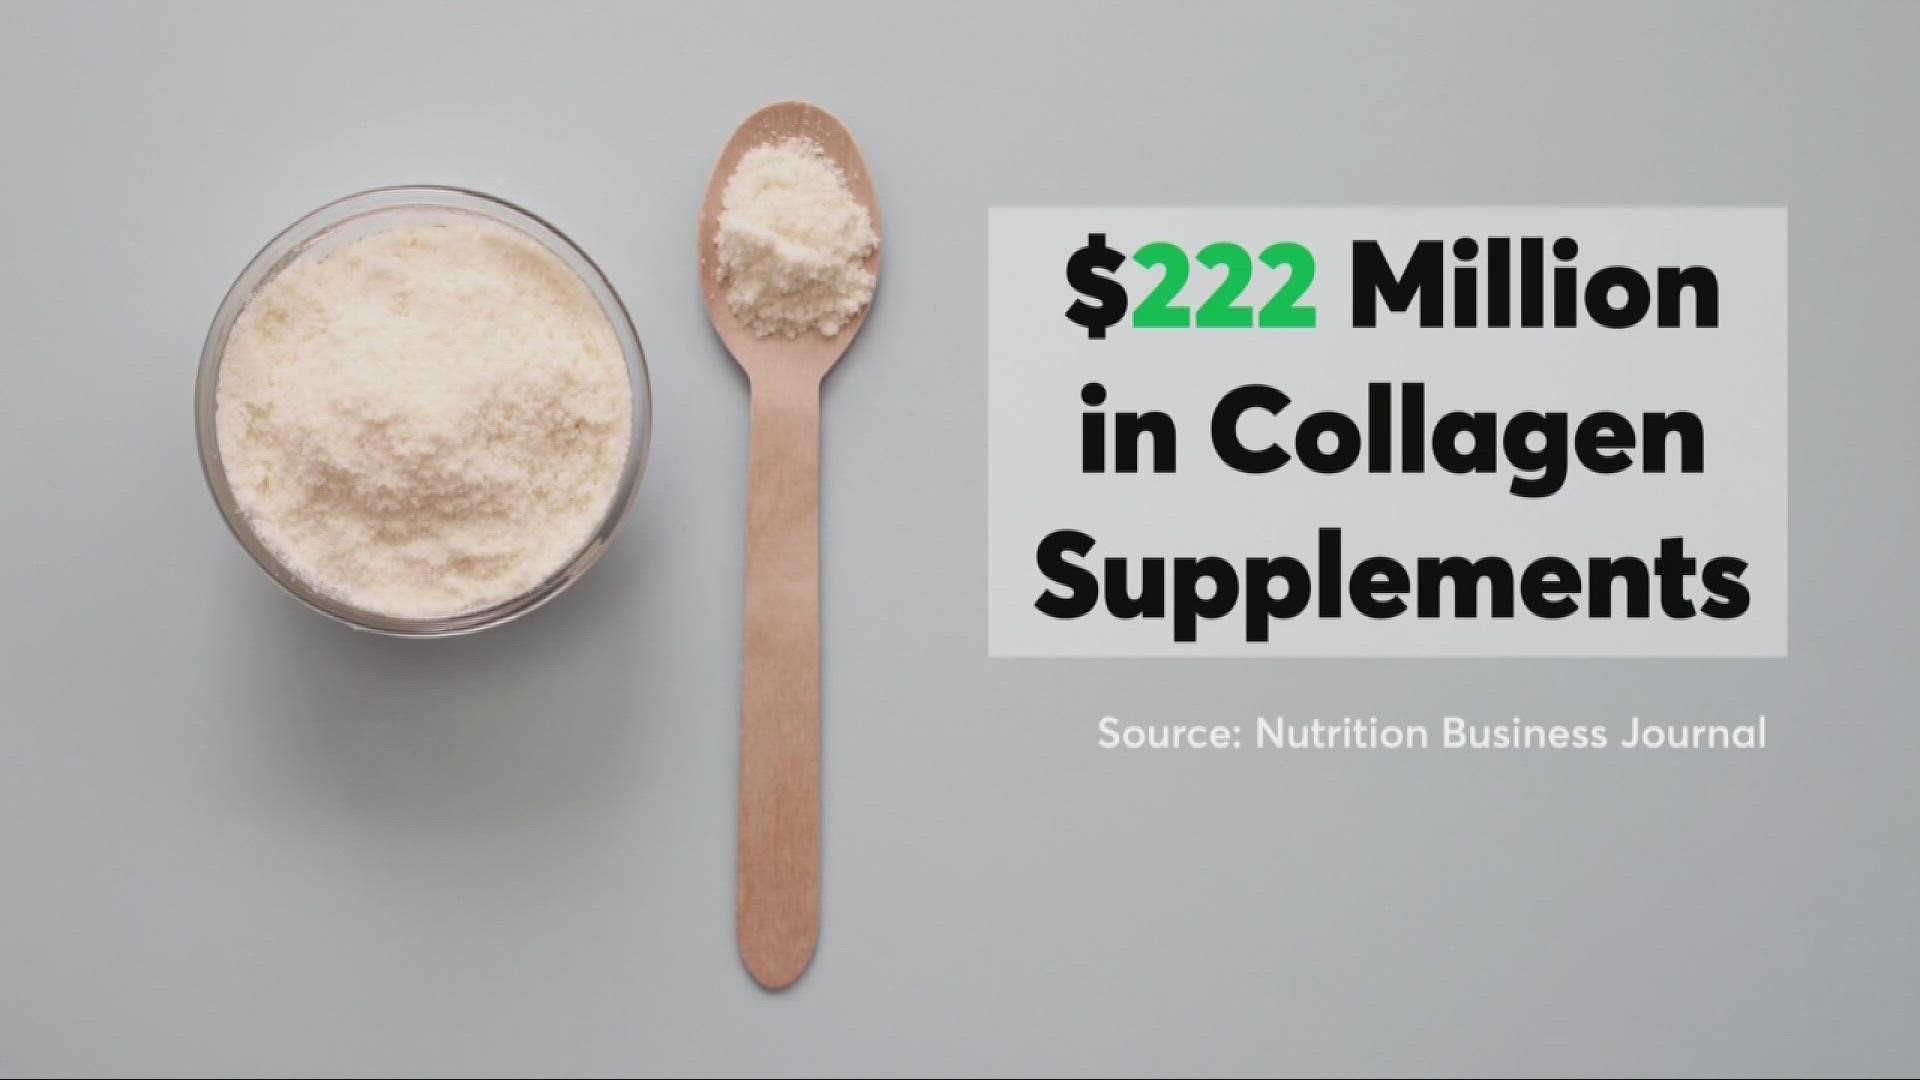 Thousands of U.S. consumers spent 222 million dollars on collagen supplements in 2021 alone. So what makes this popular protein so special?